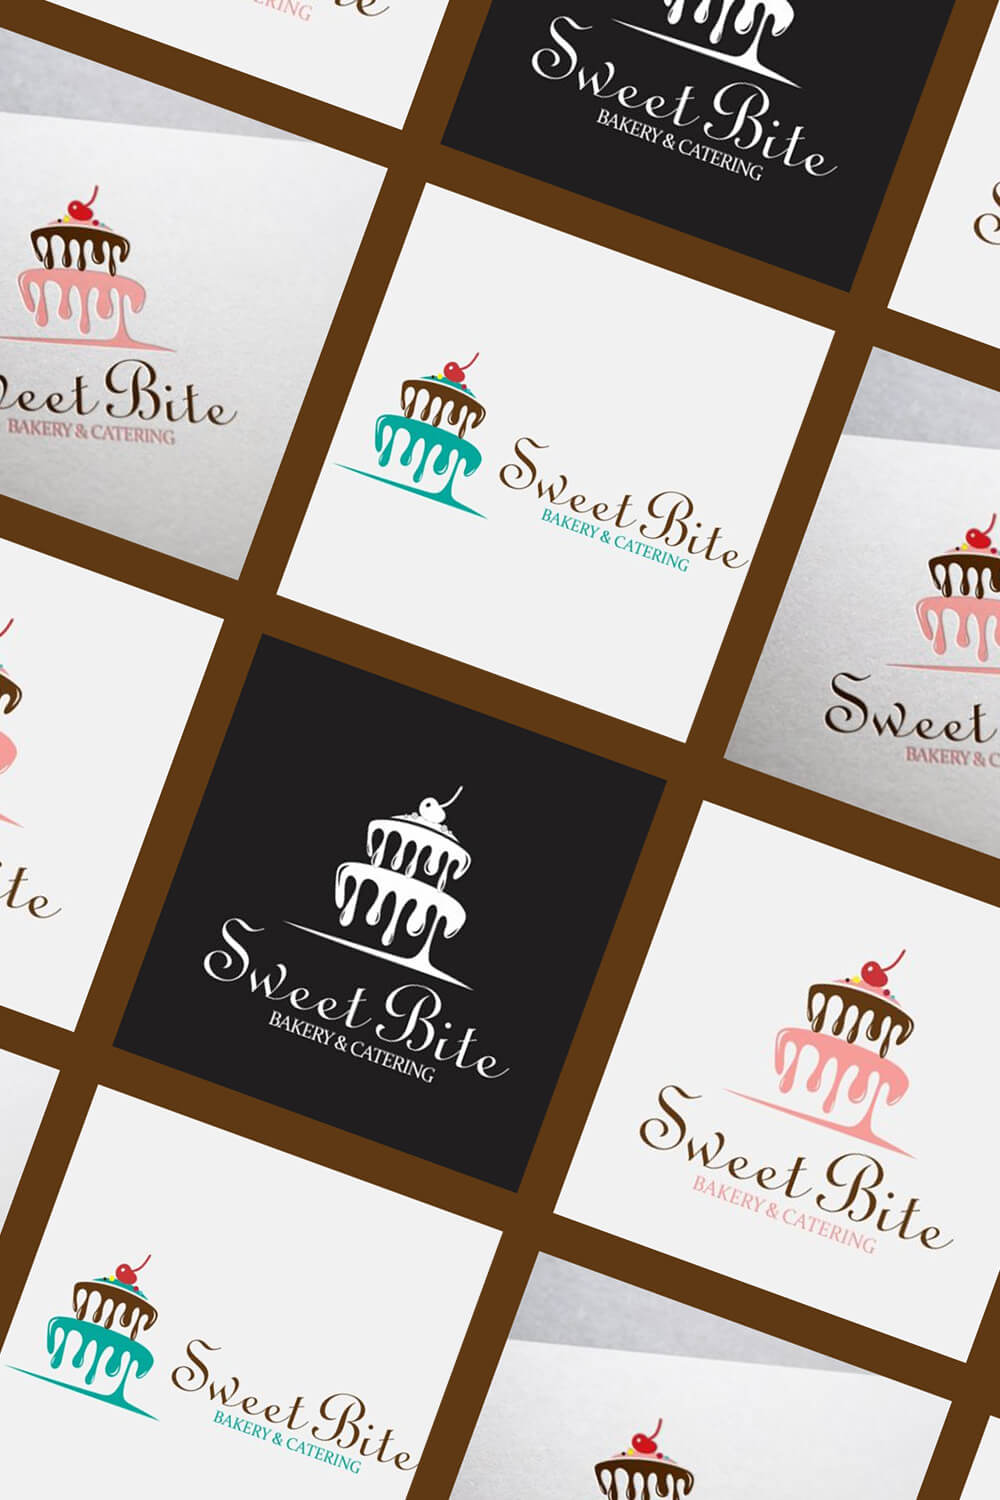 Light and dark "Sweet Bite" logos in square brown frames staggered at an angle.